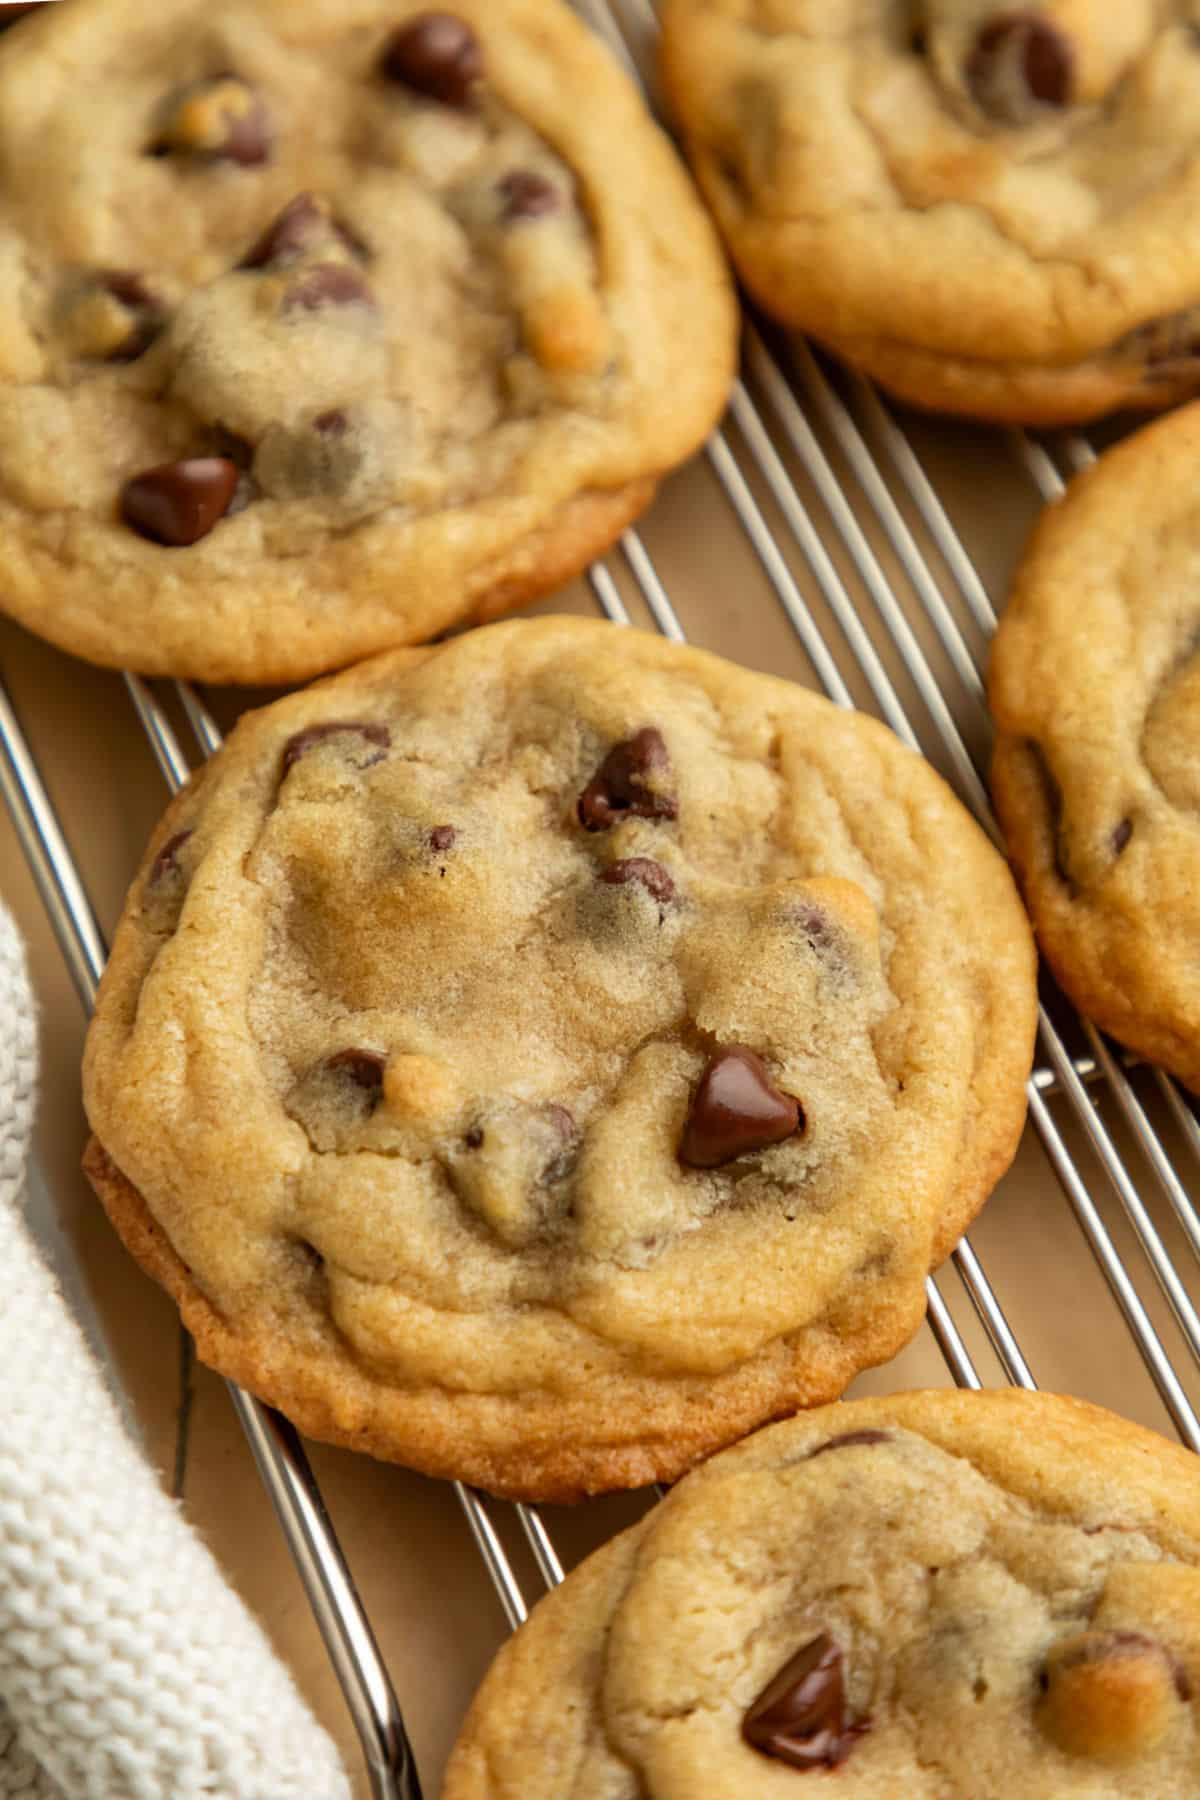 Rows of bakery style chocolate chip cookies at an angle.